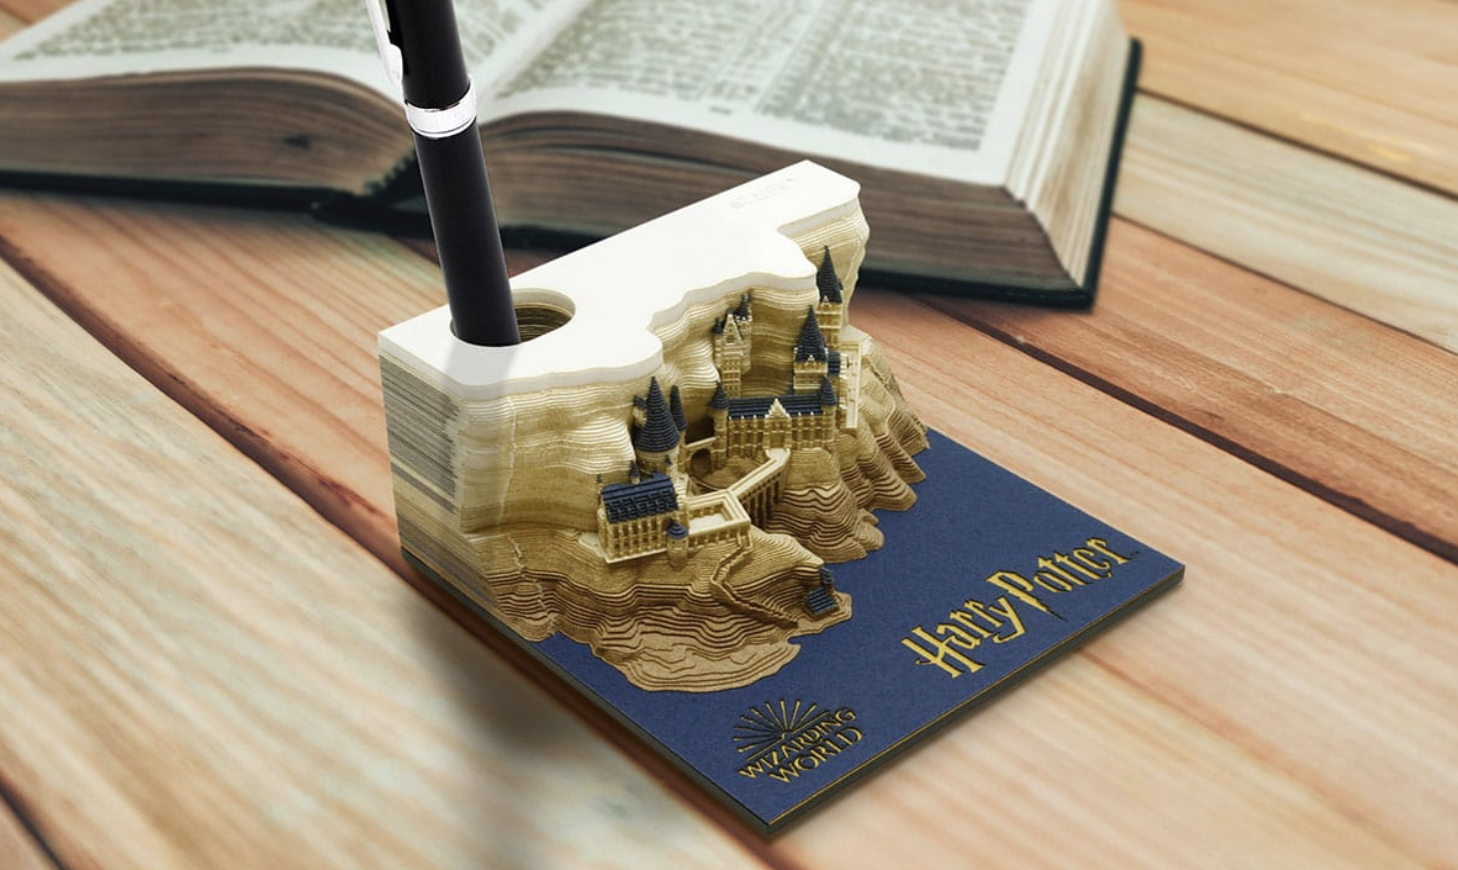 Harry Potter memo pad reveal embedded 